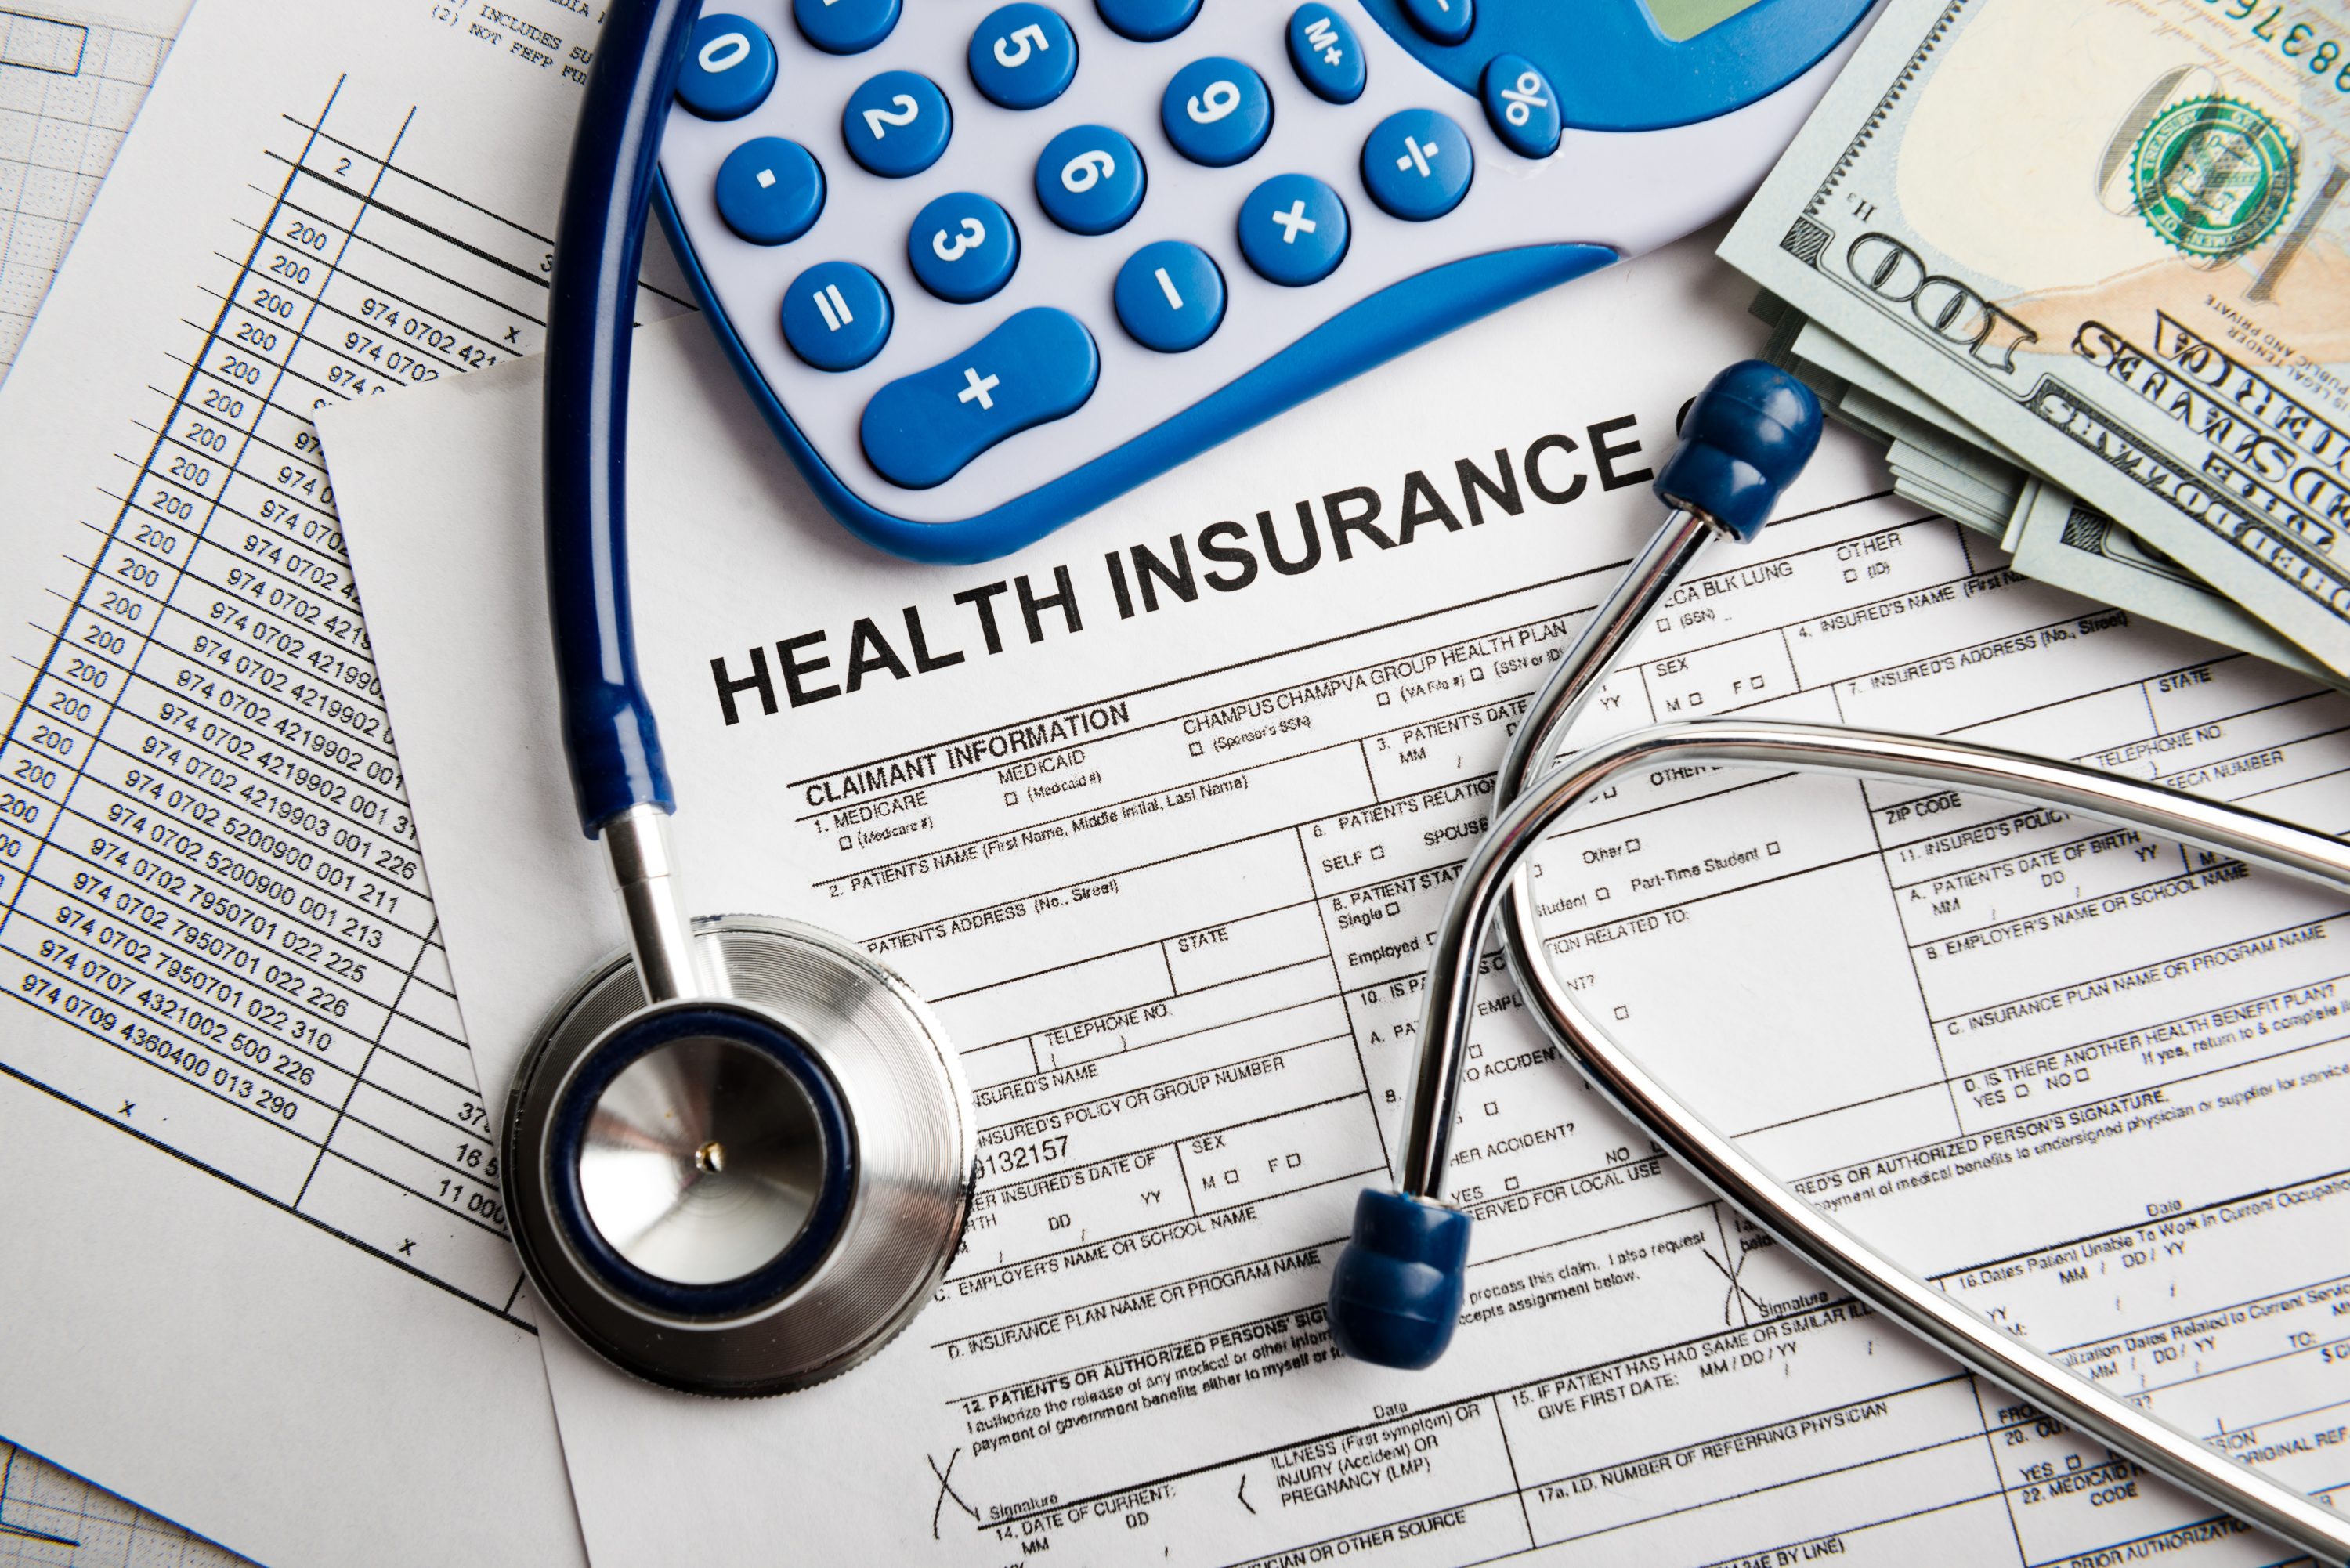 Key Terms to Know when Shopping for Health Insurance